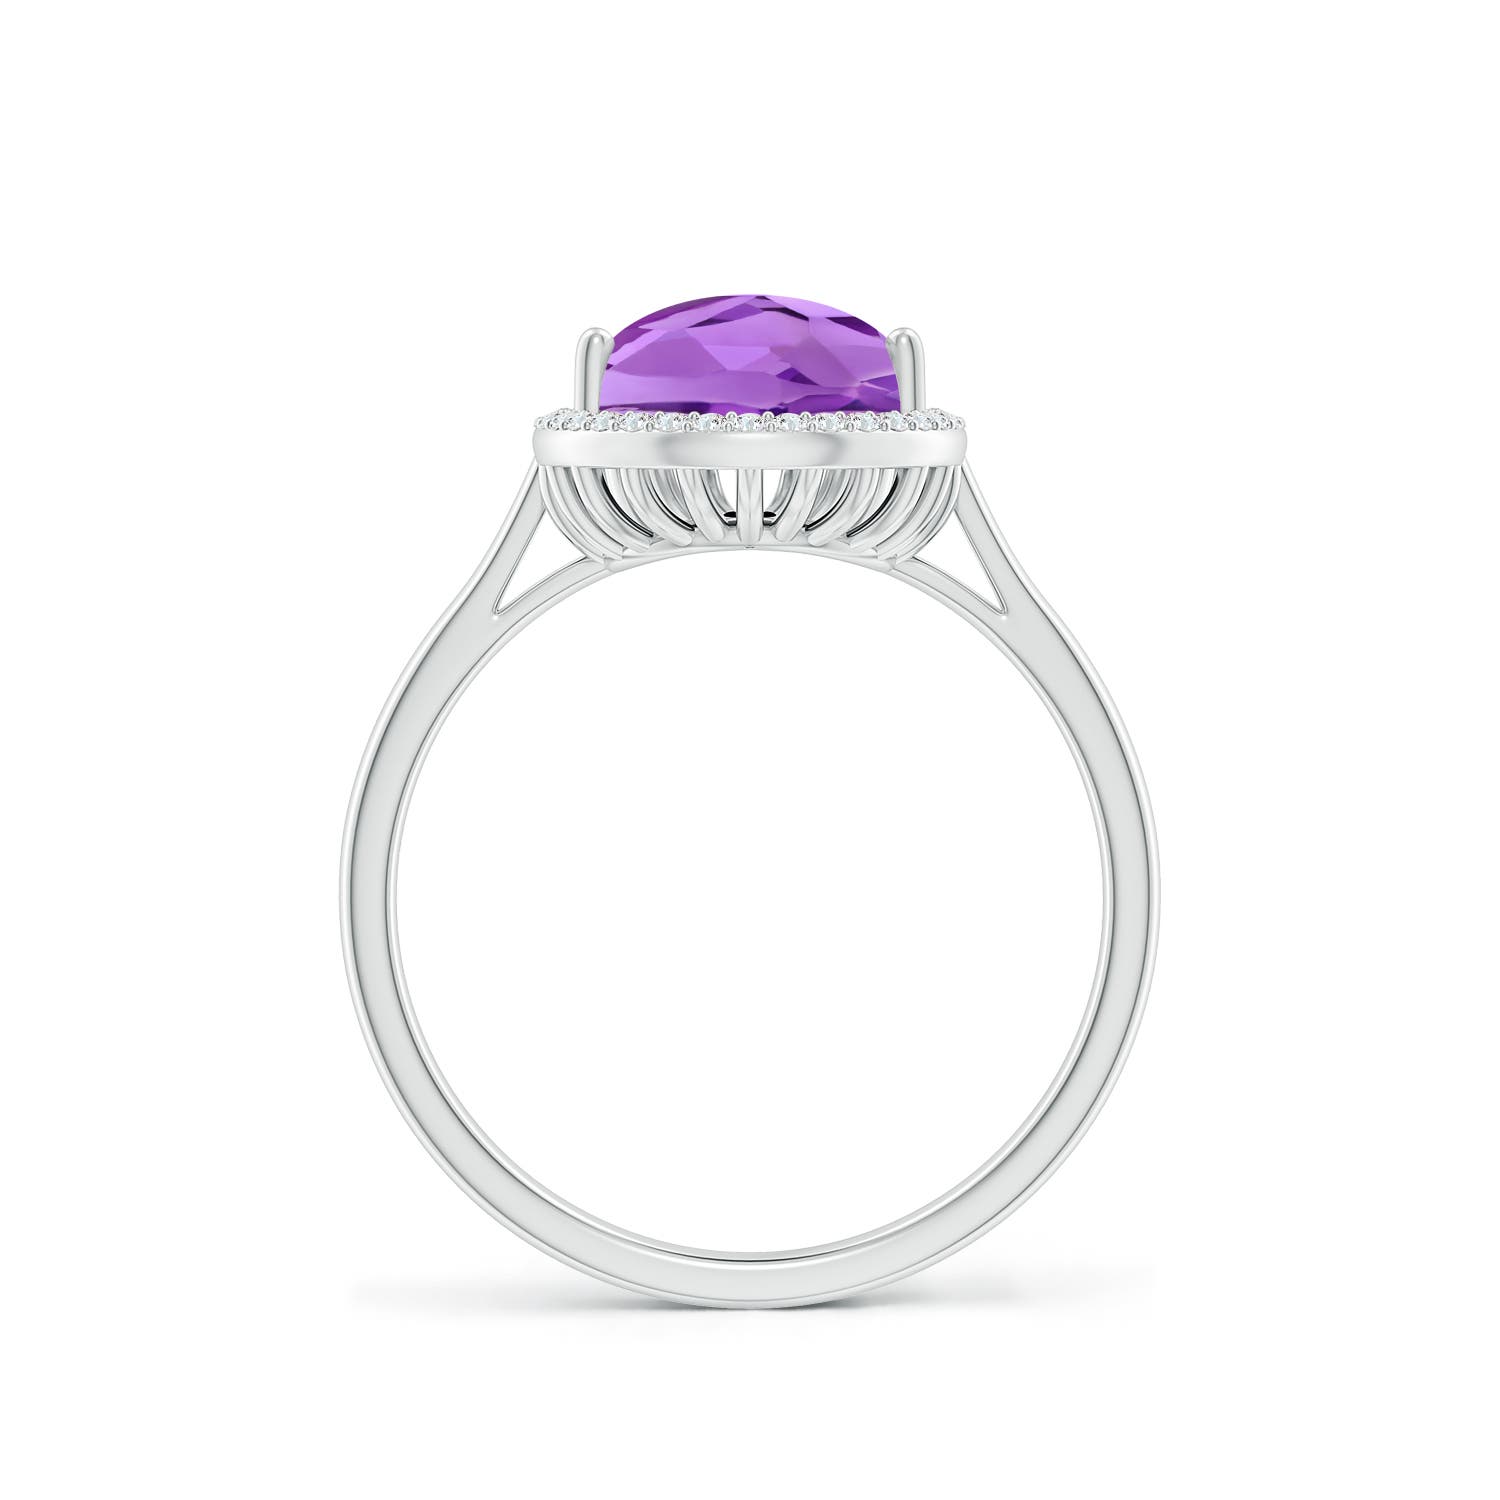 AA - Amethyst / 2.79 CT / 14 KT White Gold